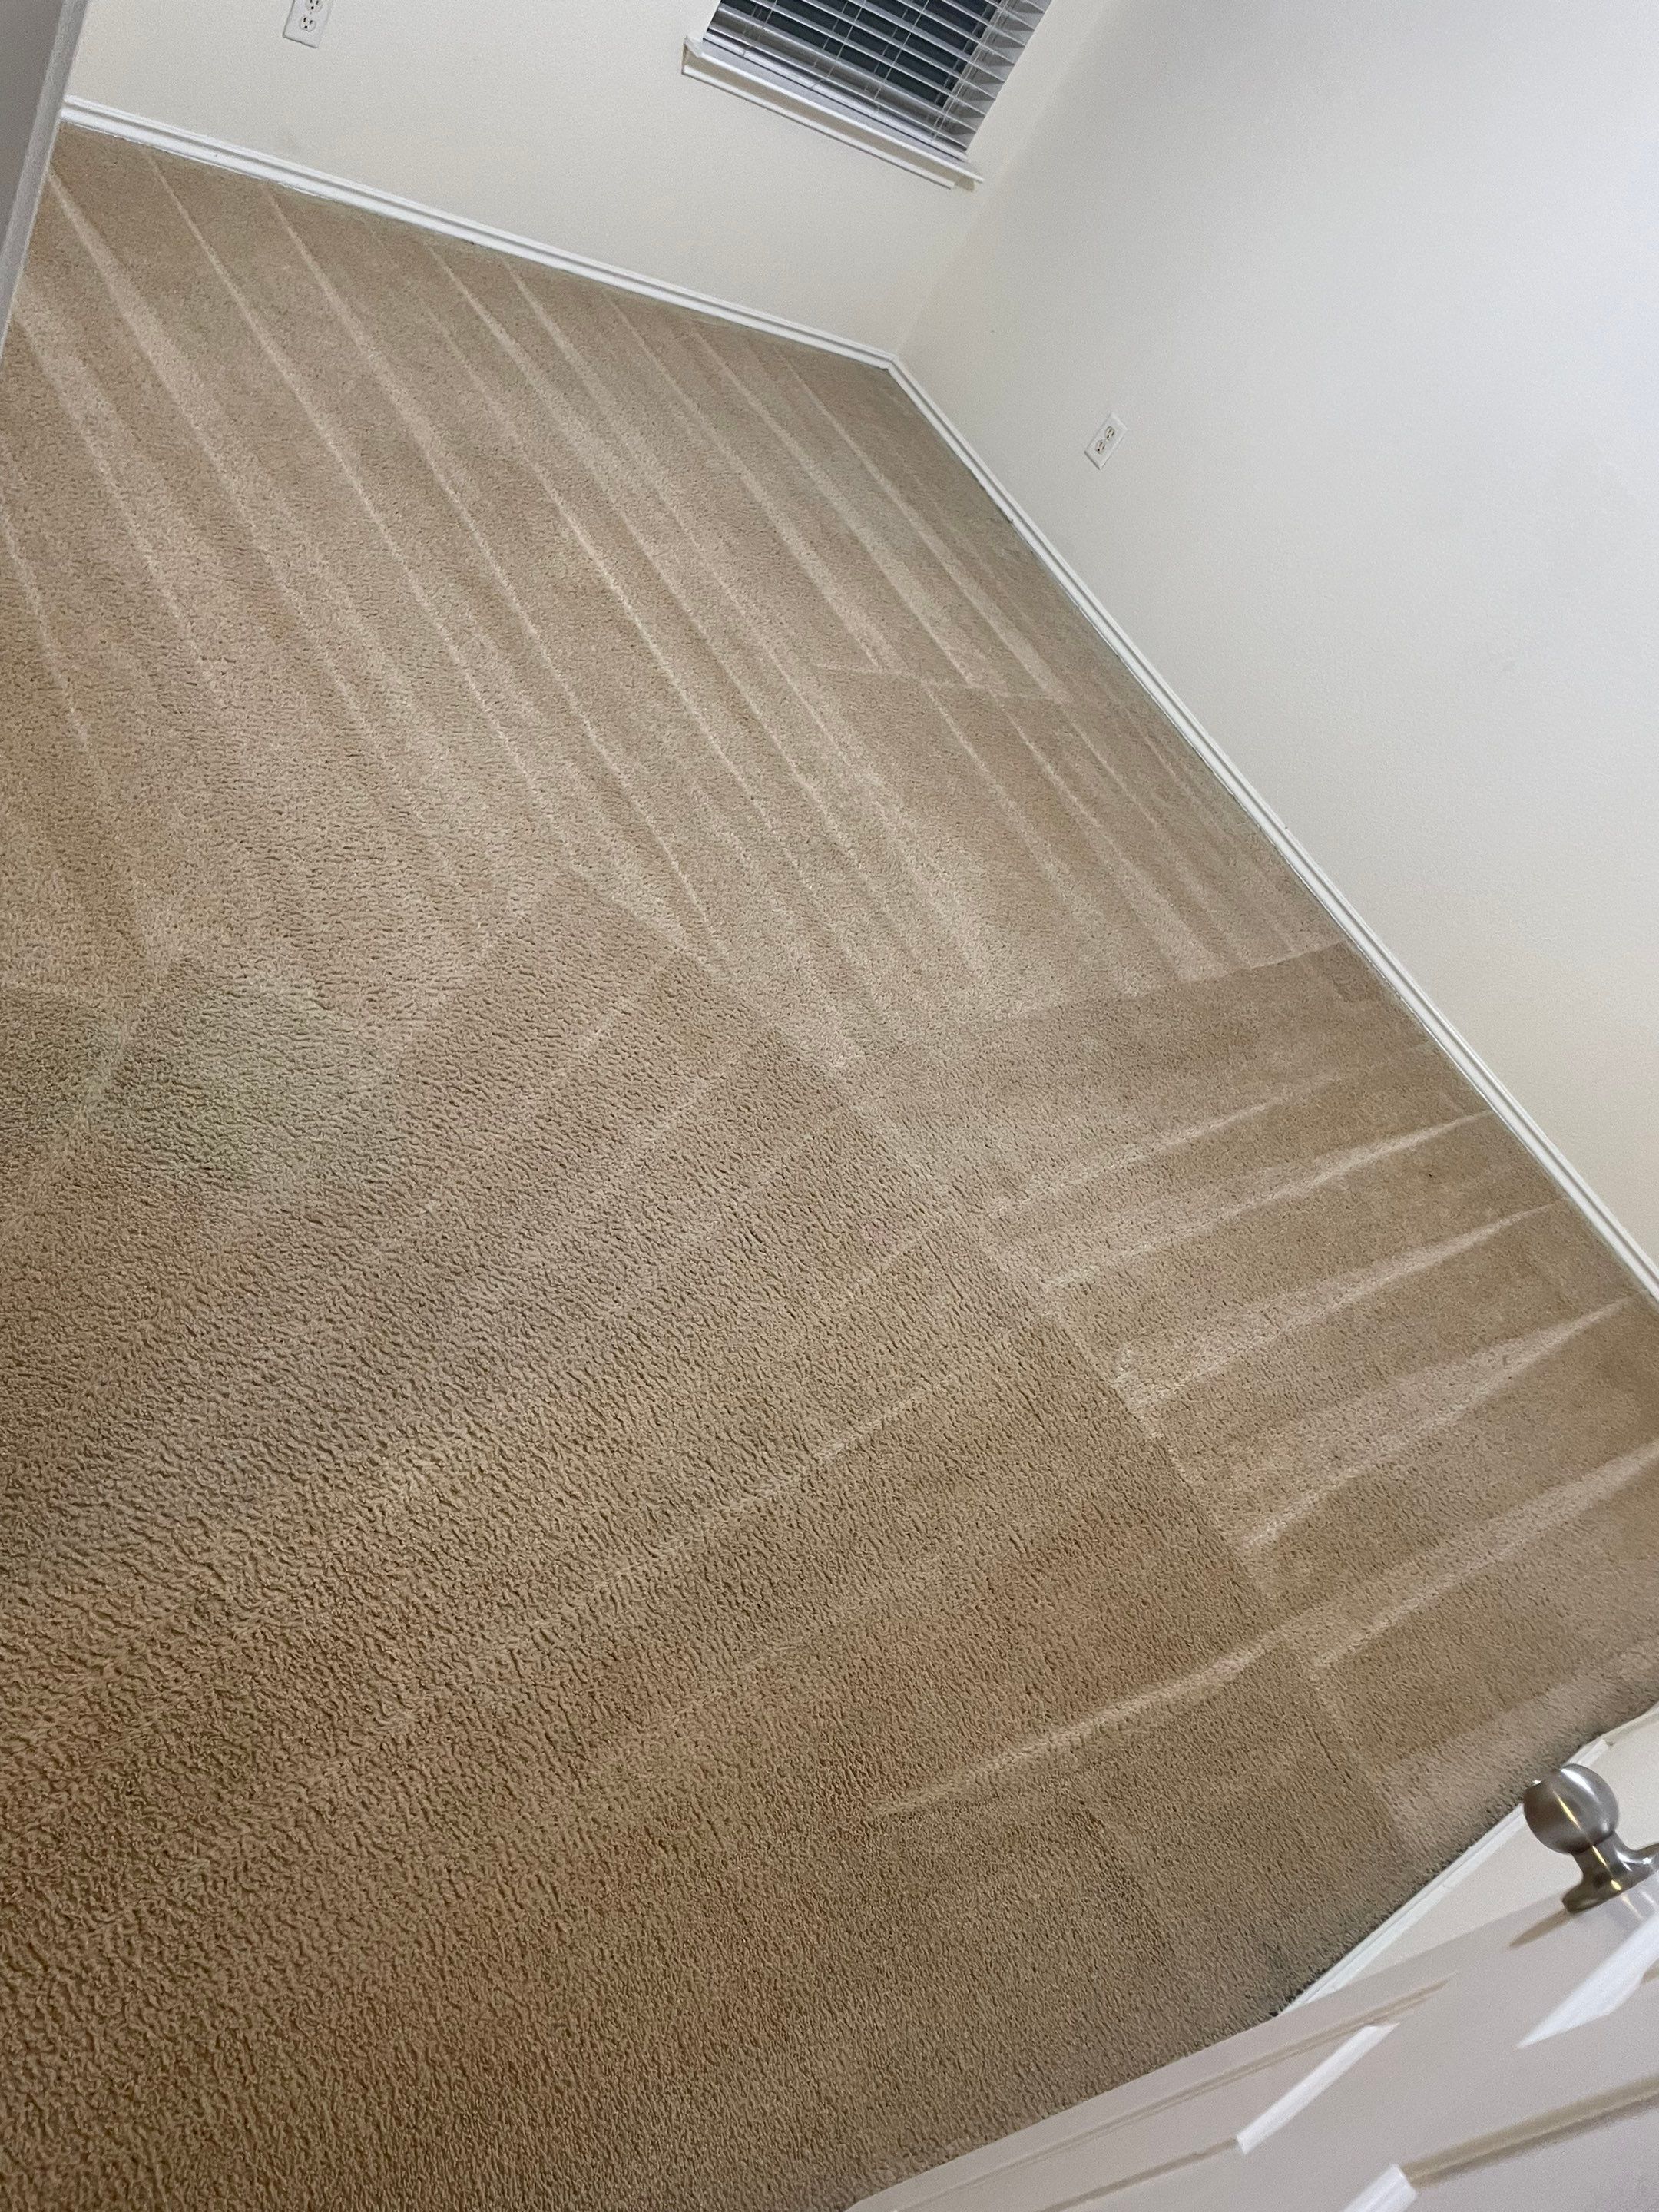 carpet cleaning service creating clean patterns on beige carpet in an empty room